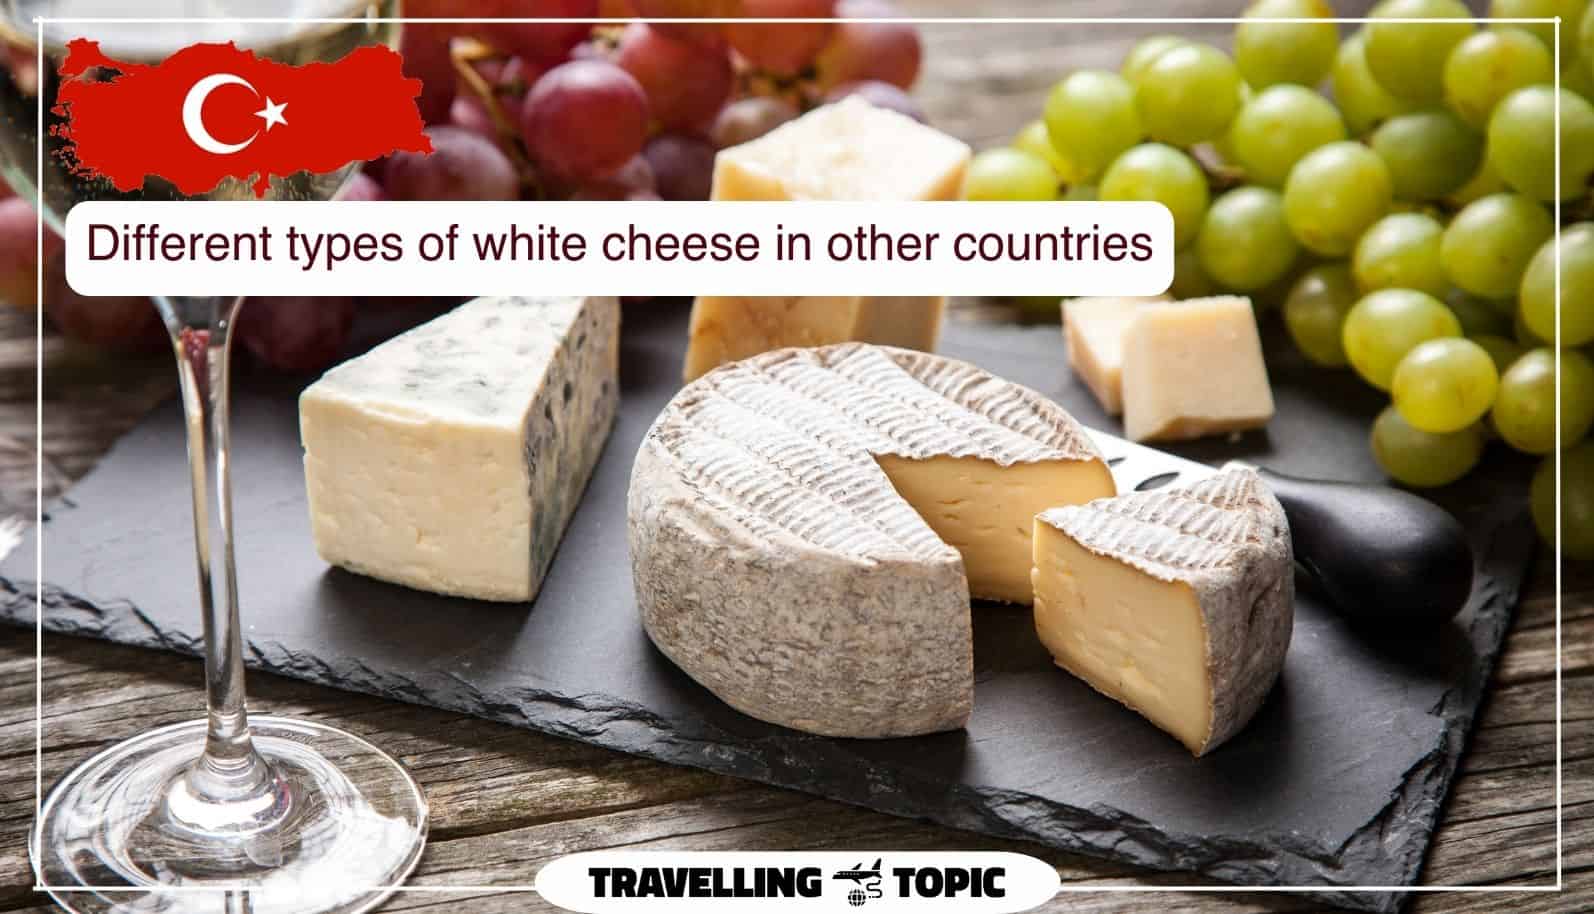 Different types of white cheese in other countries